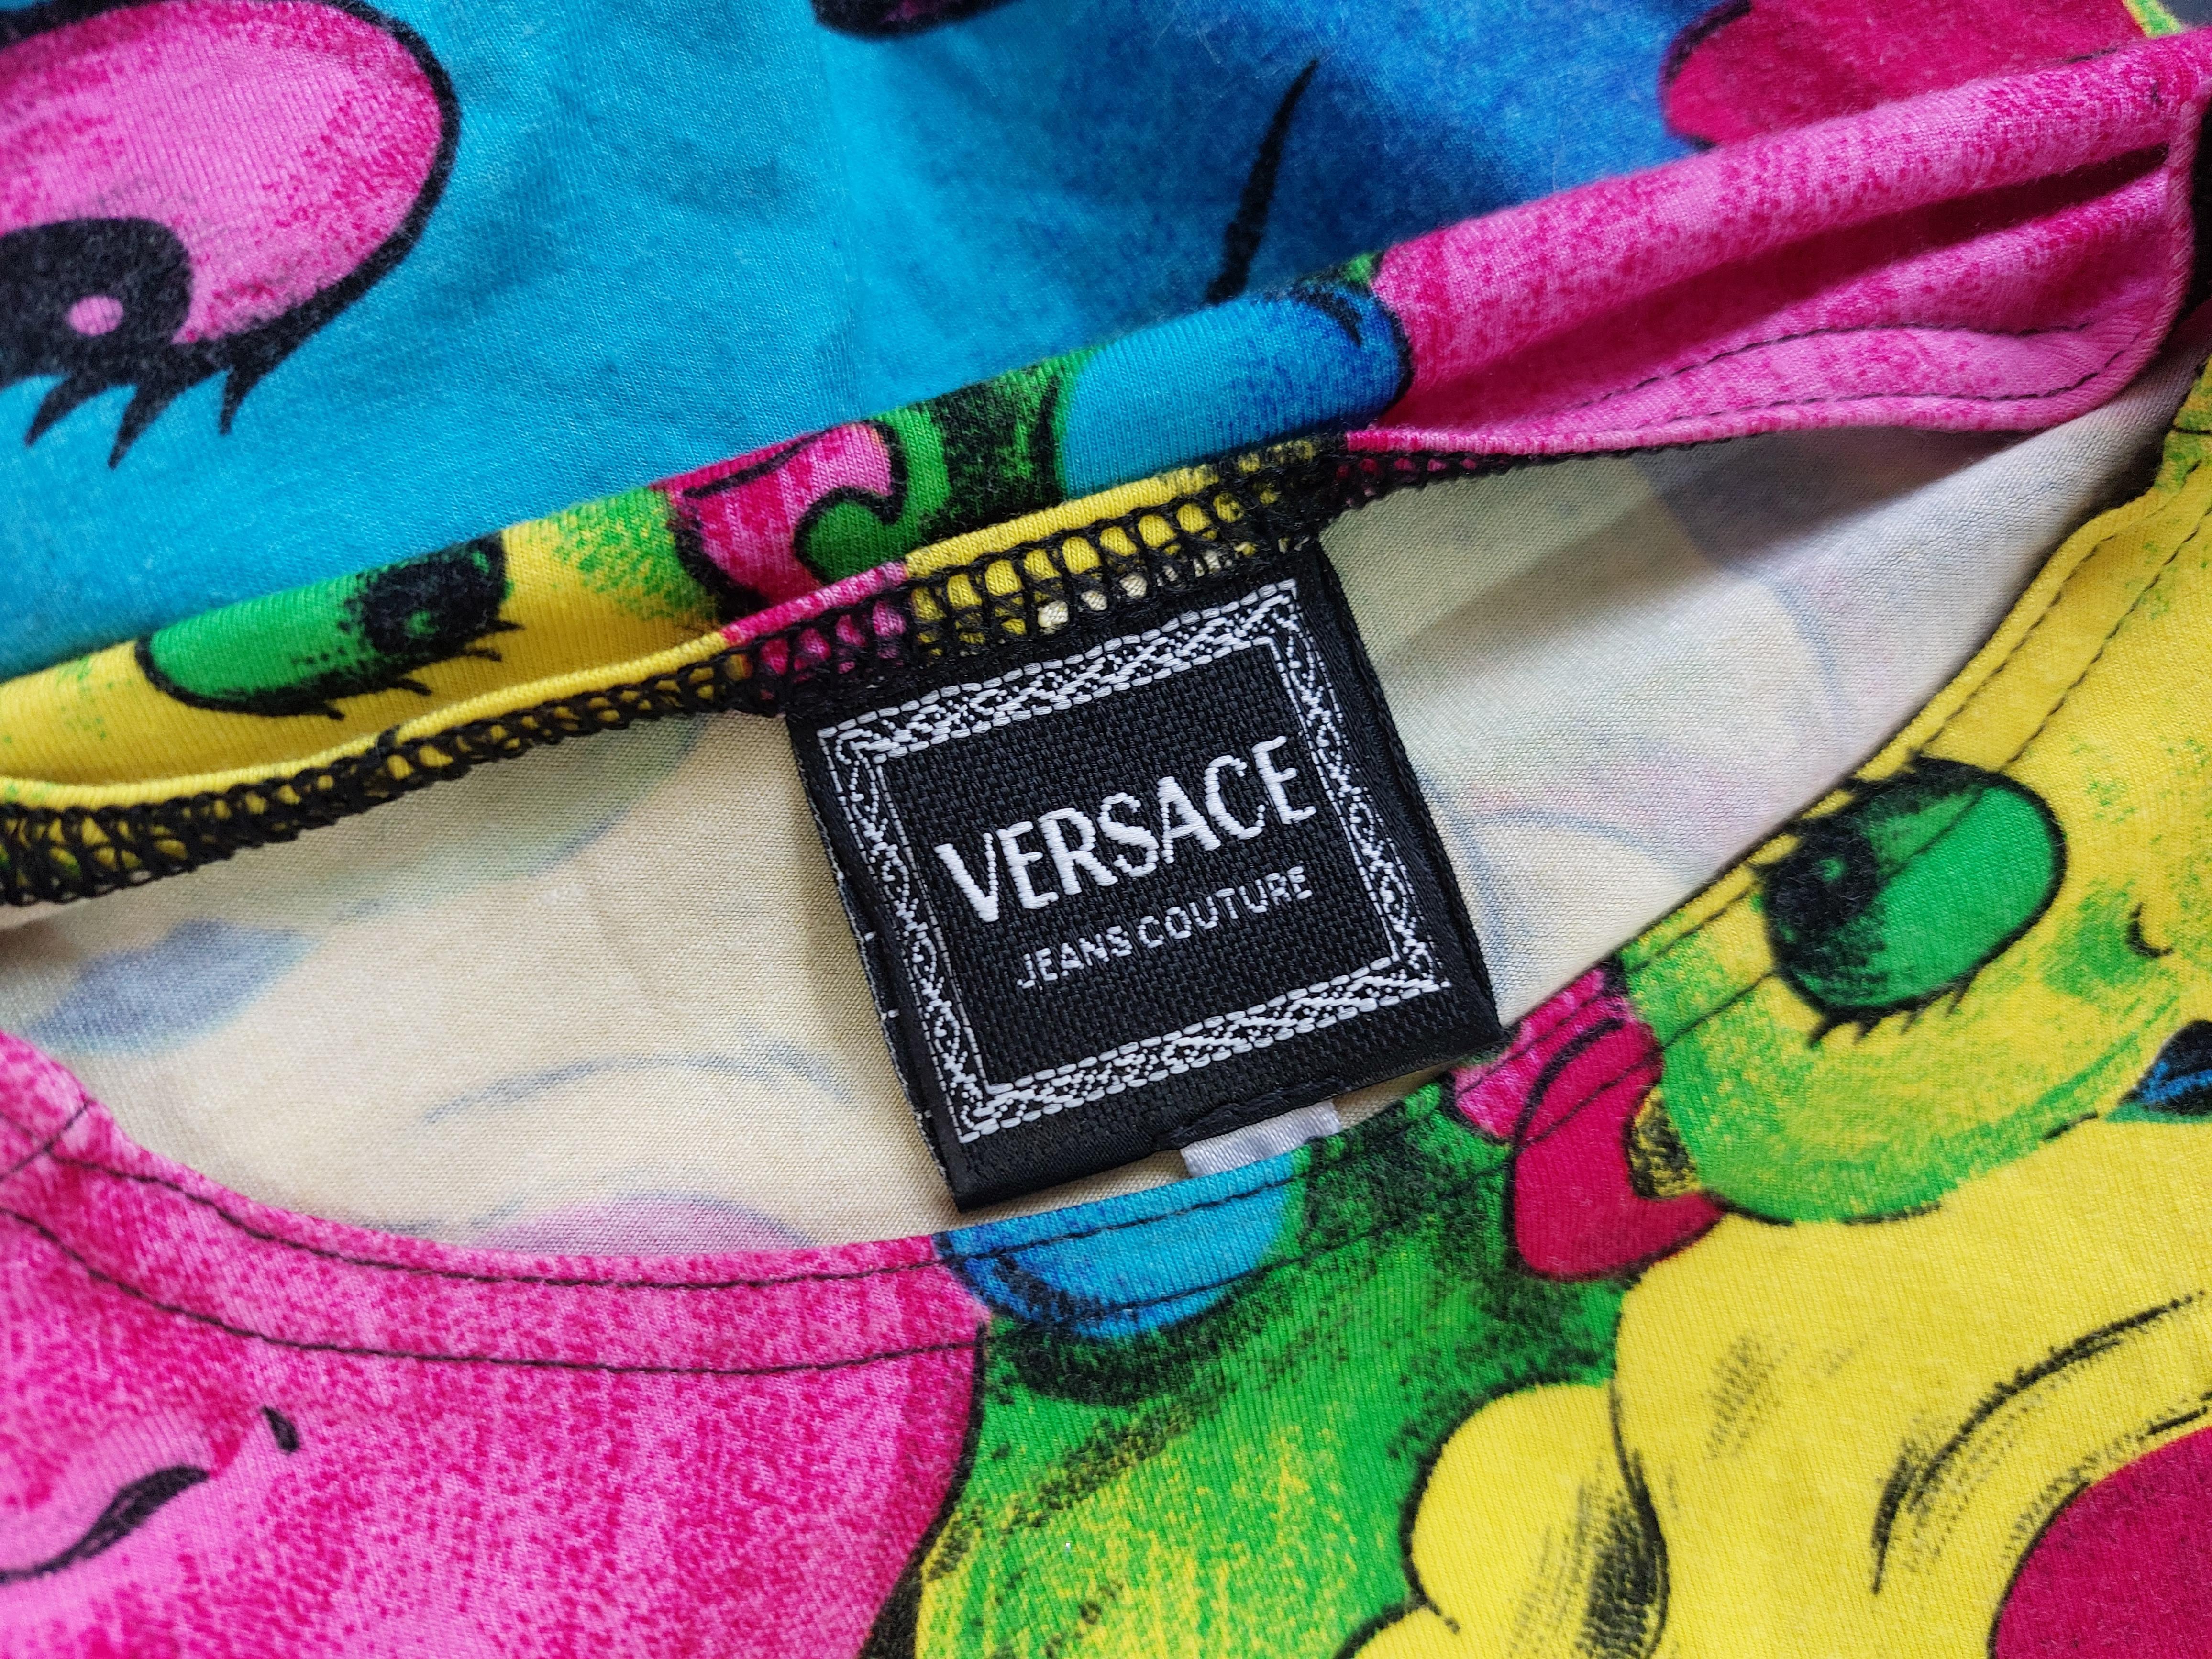 GIANNI VERSACE Andy Warhol Pop Art Marilyn Monroe Betty Boop SS91 Bodysuit

Rare Gianni Versace Jeans Pop Art Marilyn Monroe and Betty Boop print cotton bosysuit from Spring 1991 Collection in excellent condition. Collectors item!
Donatella Versace